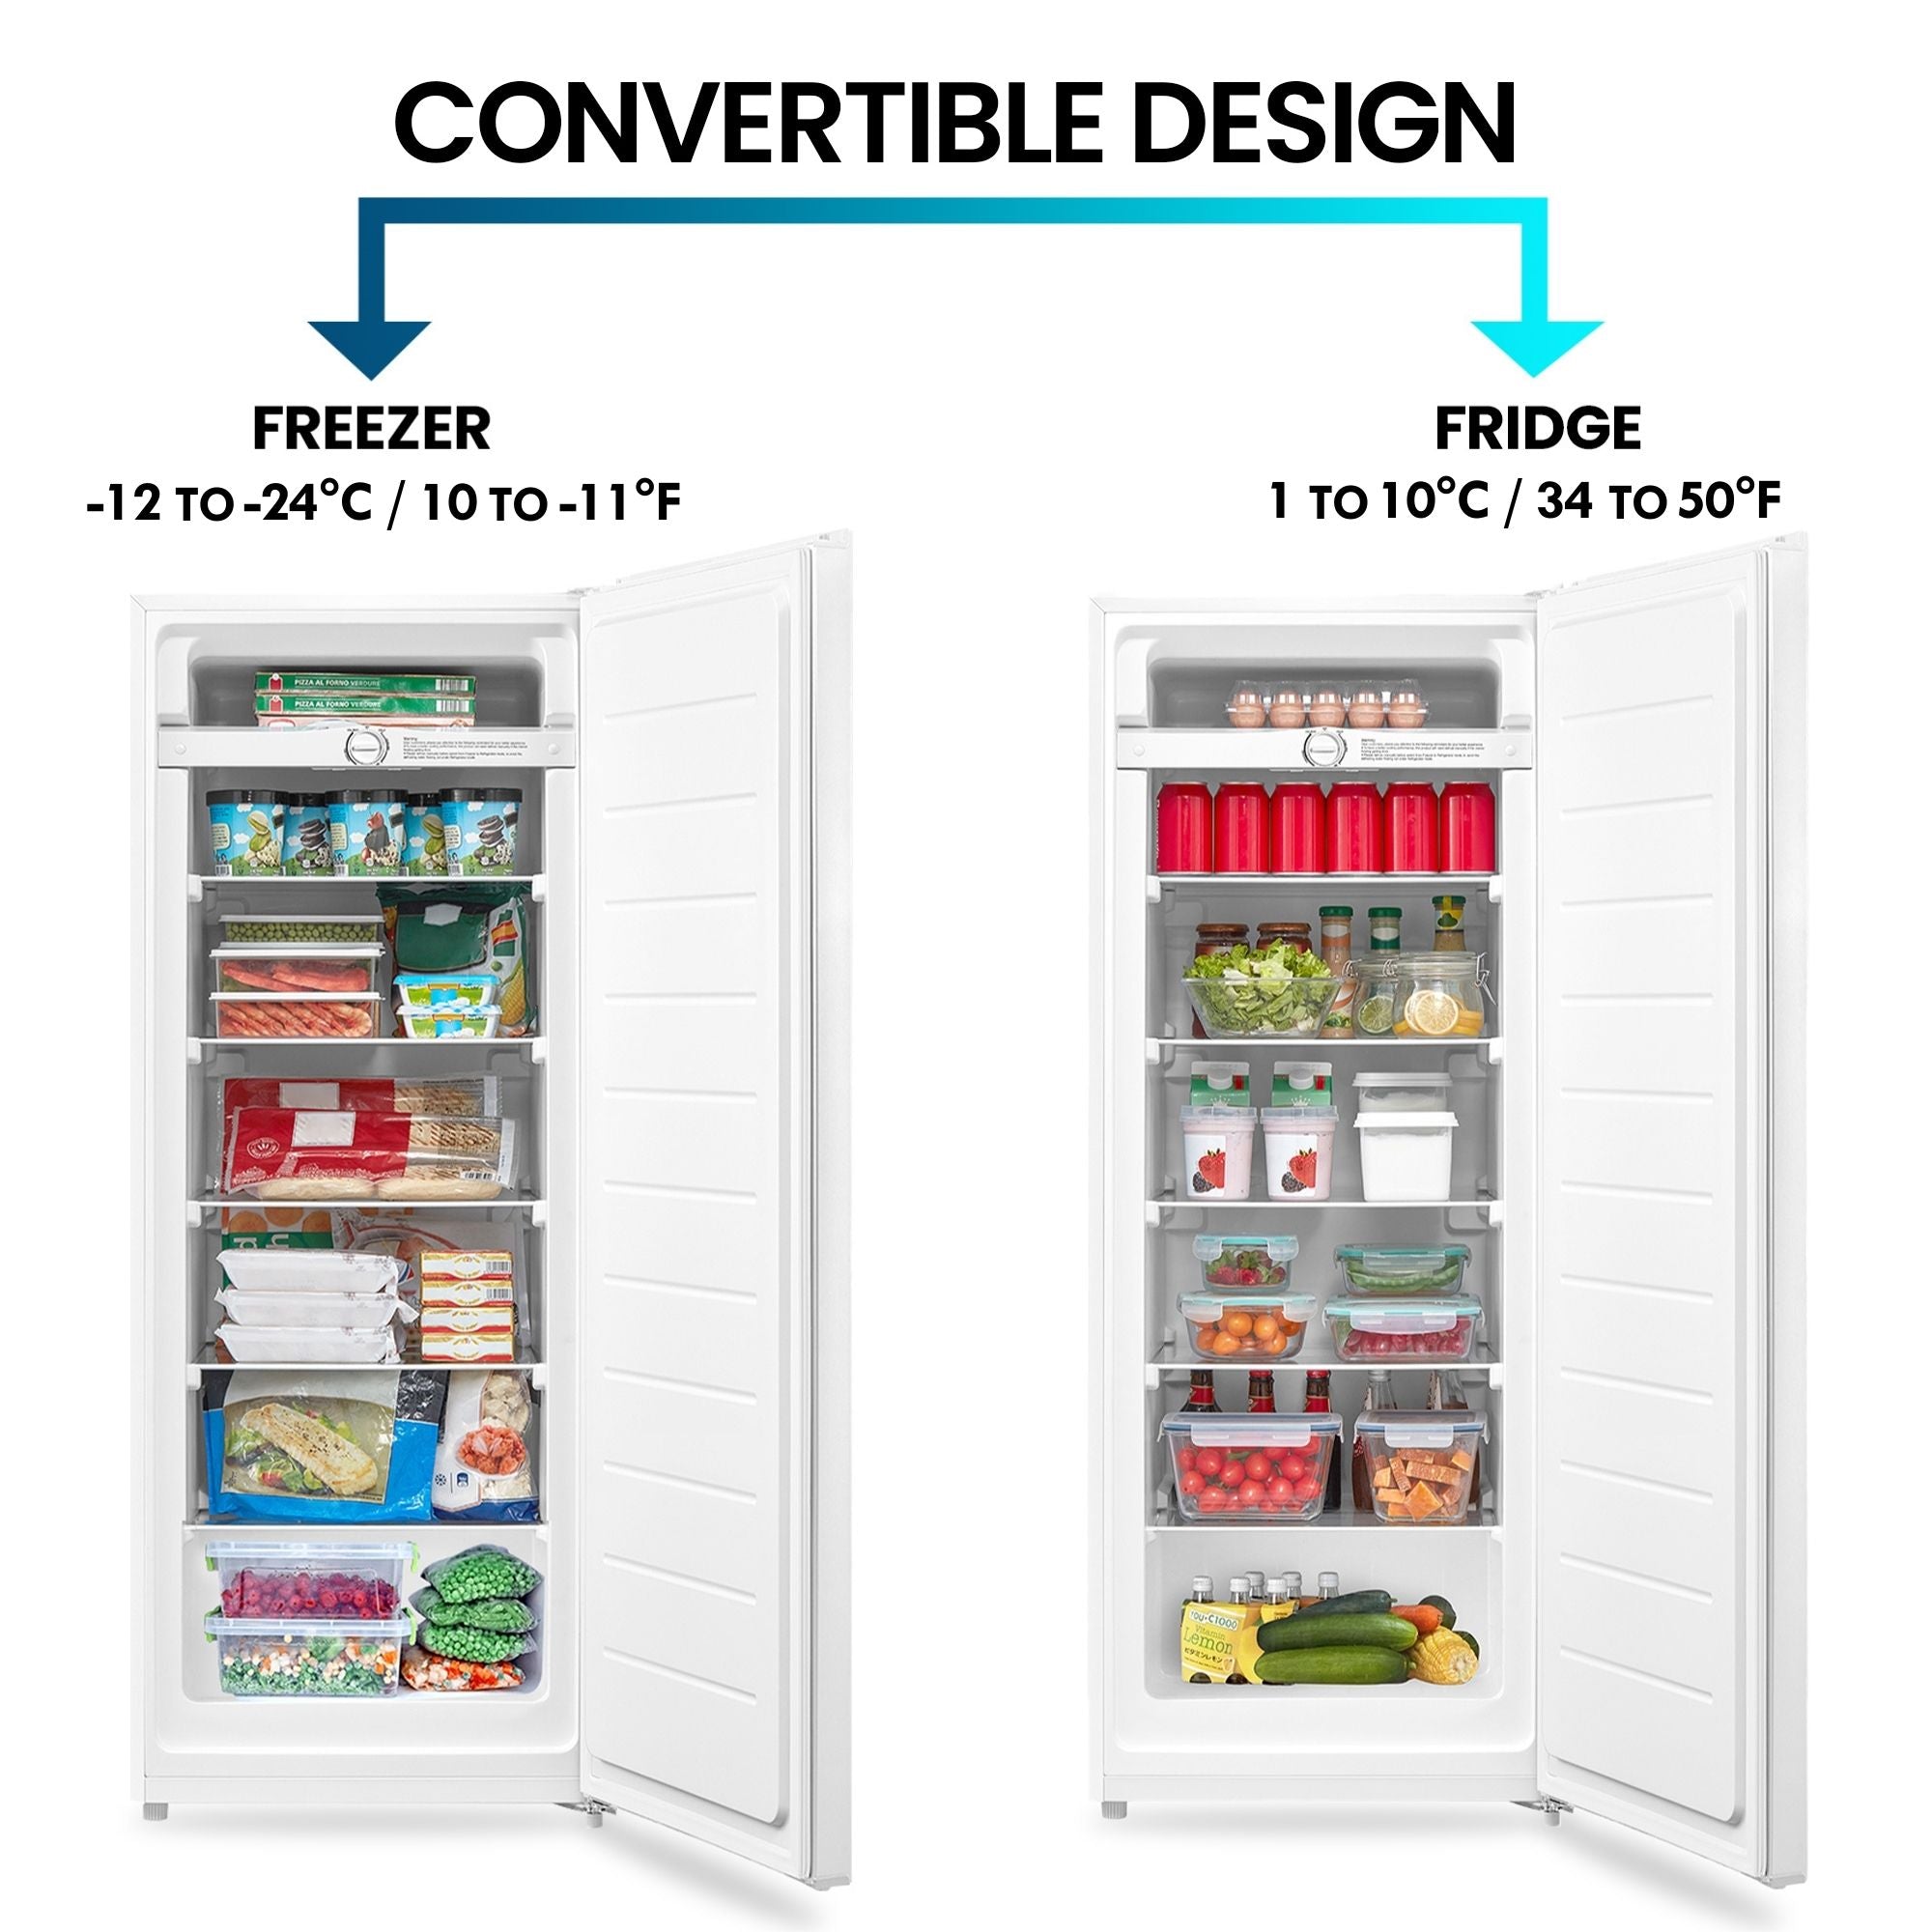 Two pictures show the Kenmore upright convertible open and filled with food items being used as a freezer and a refrigerator. Text above reads, "Convertible design: Freezer -12°C to -24°C; Fridge 1°C to 10°C"